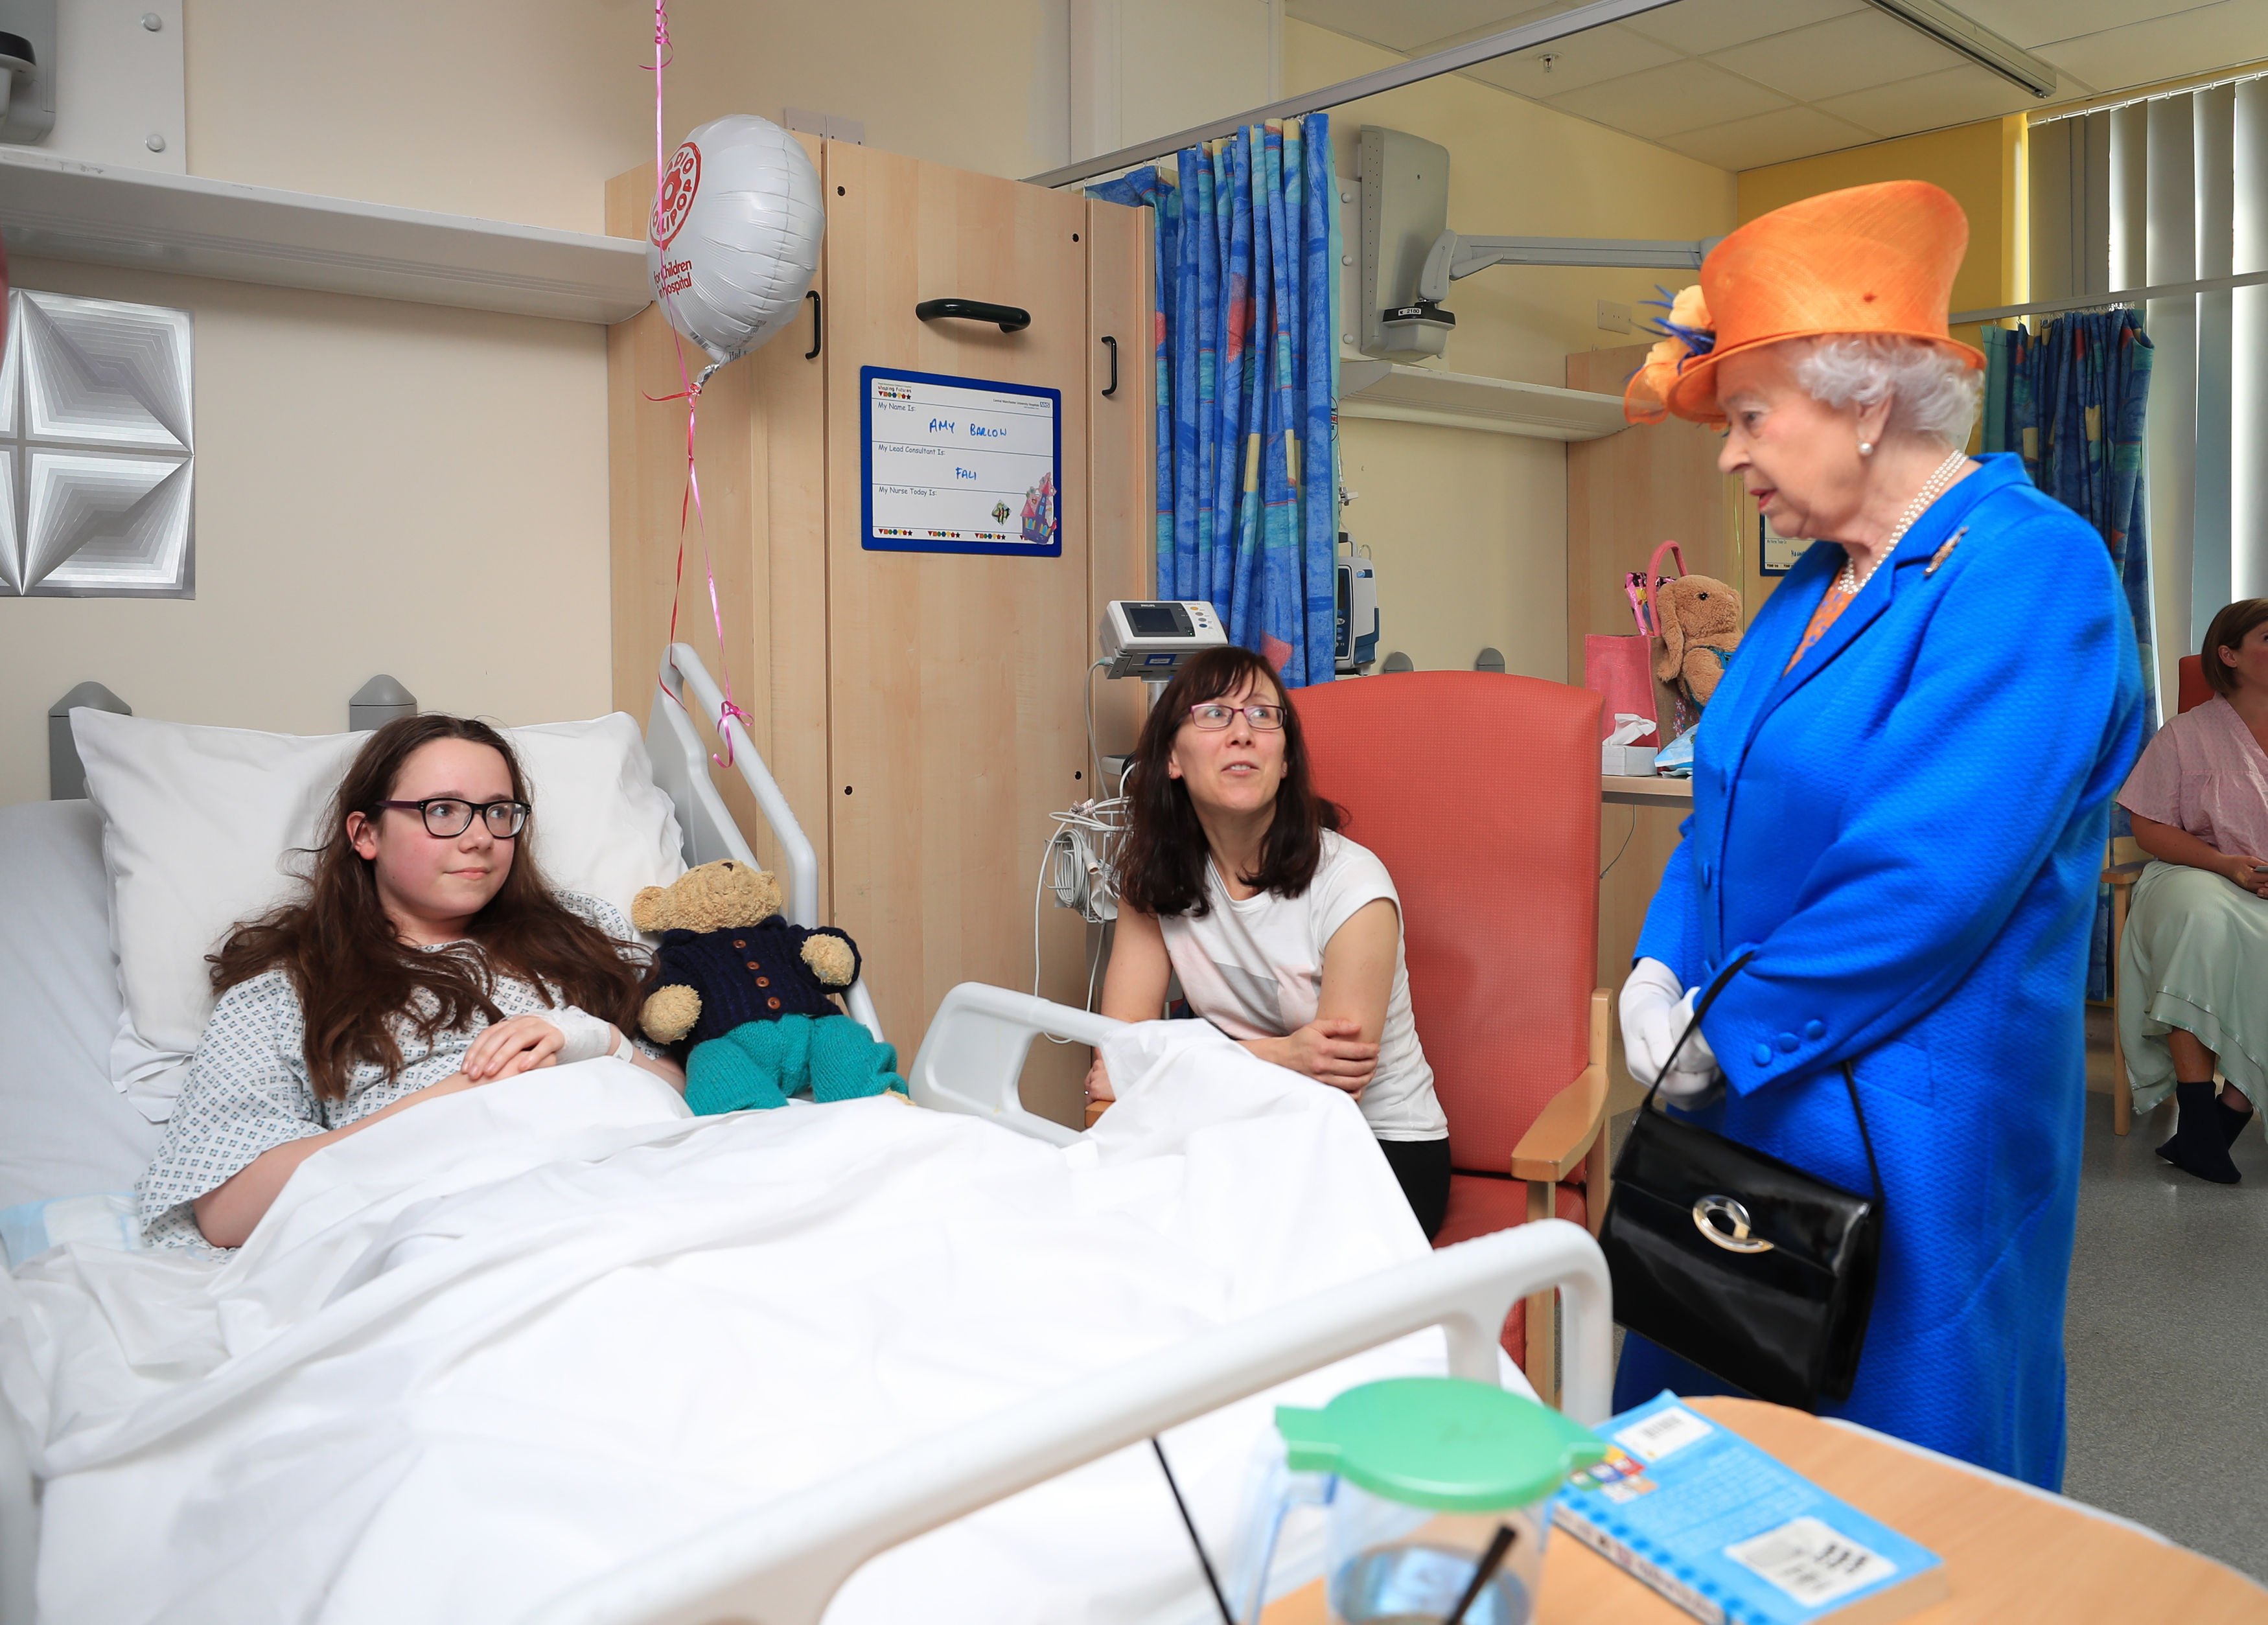 Queen Elizabeth II speaks to Amy Barlow, 12, from Rawtenstall, Lancashire, and her mother, Kathy during a visit to the Royal Manchester Children's Hospital to meet victims of the terror attack on May 25, 2017